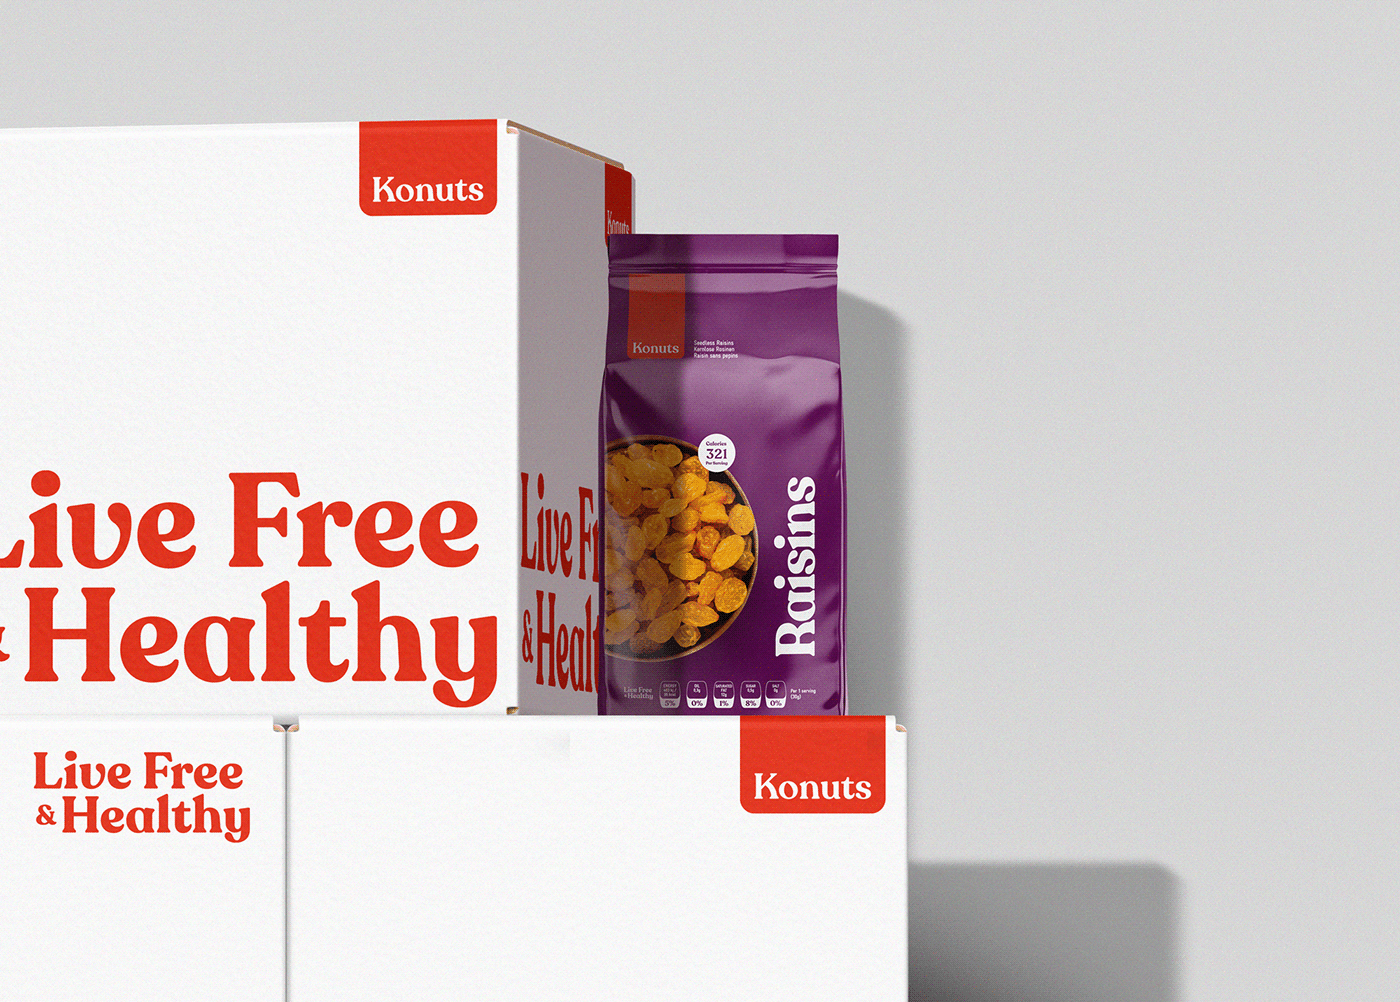 brandidentity branding  fruits graphicdesign nuts package packagedesign healthy nautre snacks